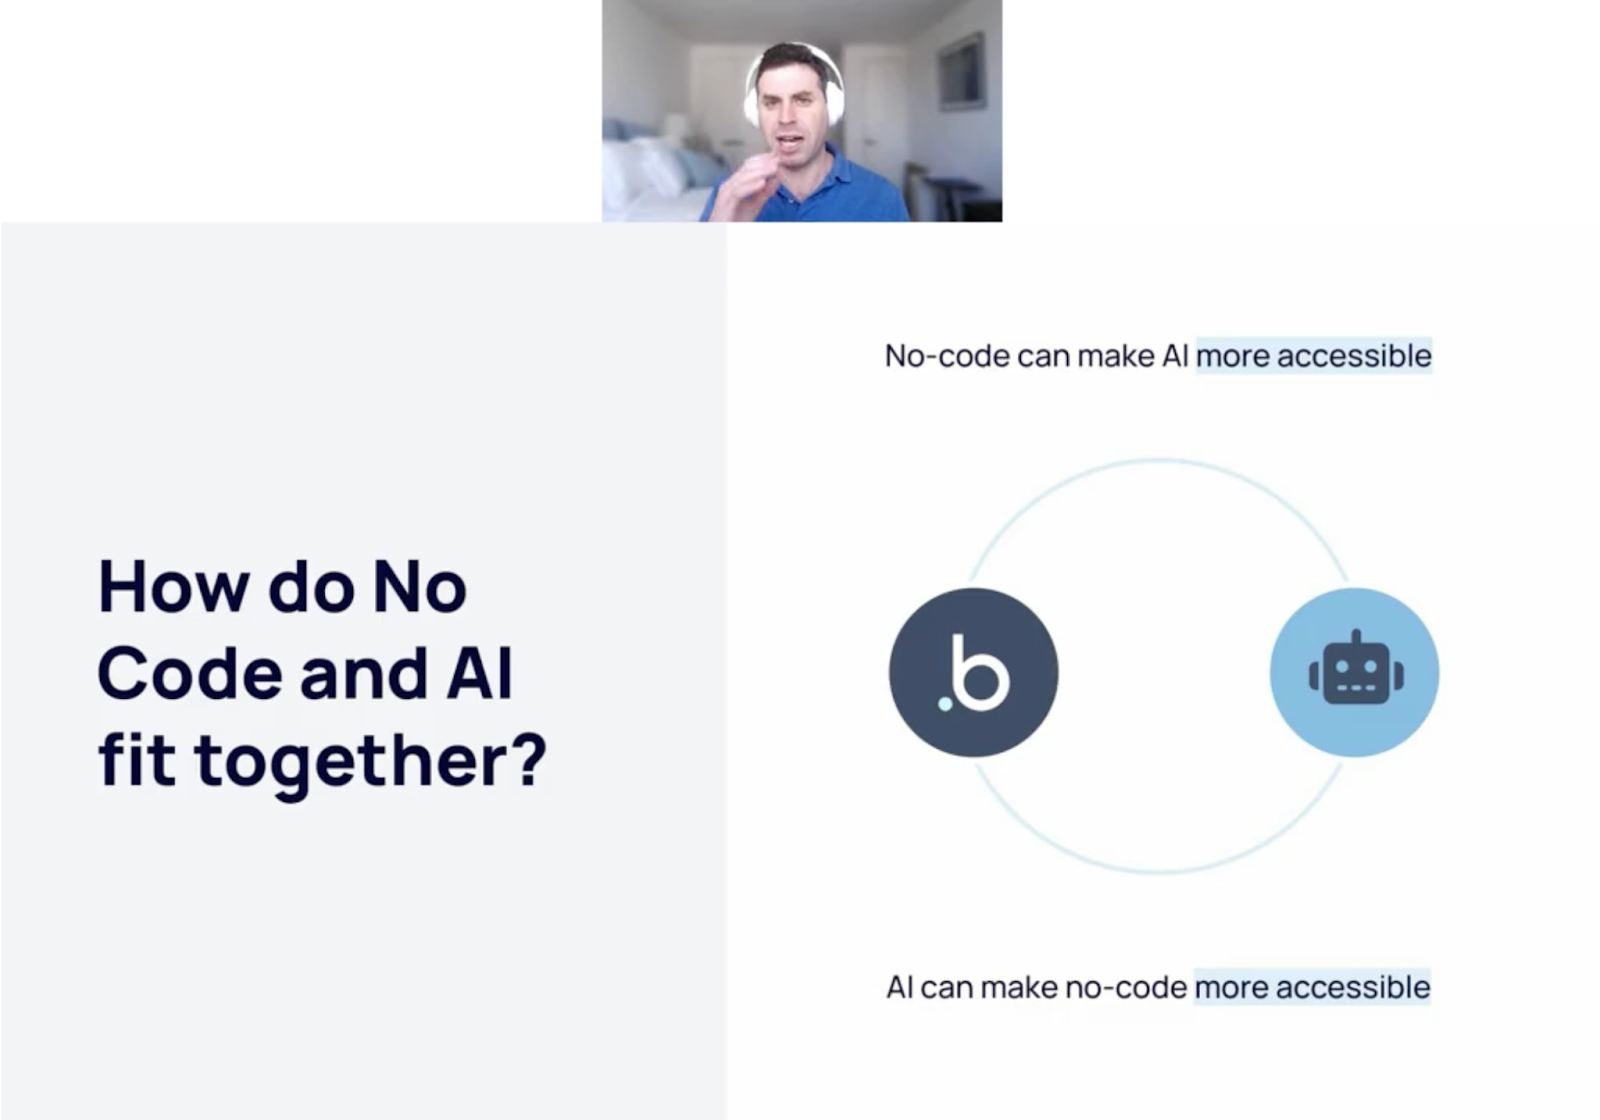 A screengrab of Josh Haas presenting a slide. On the left it says "How do No Code and AI fit together?" on the right there is a circle with icons for Bubble and AI, and it says, "No-code can make AI more accessible. AI can make no-code more accessible."